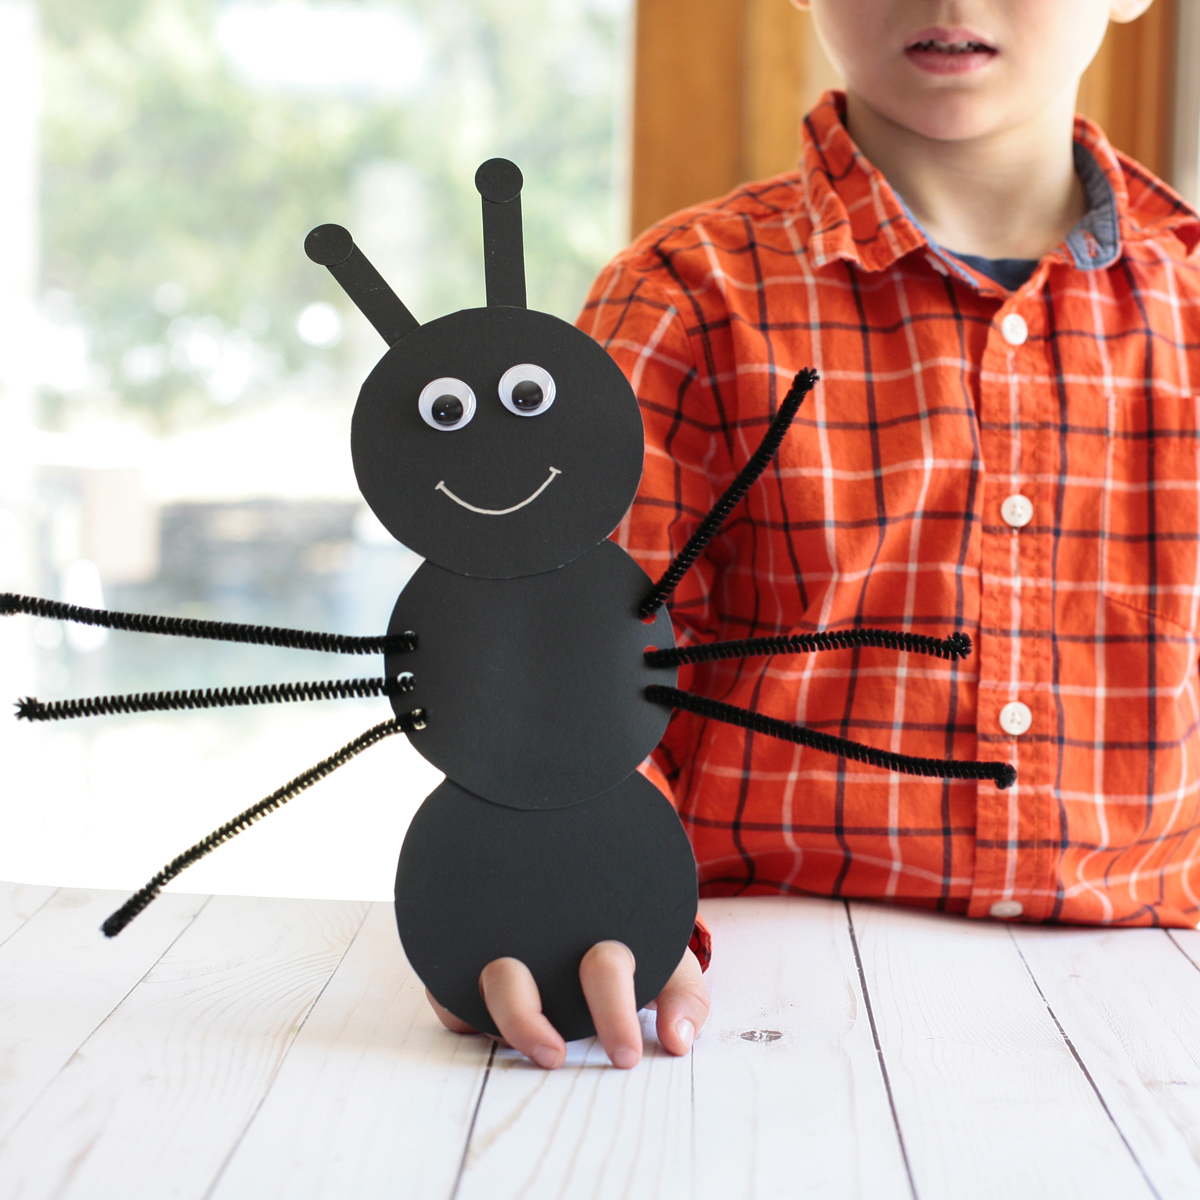 Ant Finger Puppets - Super Simple